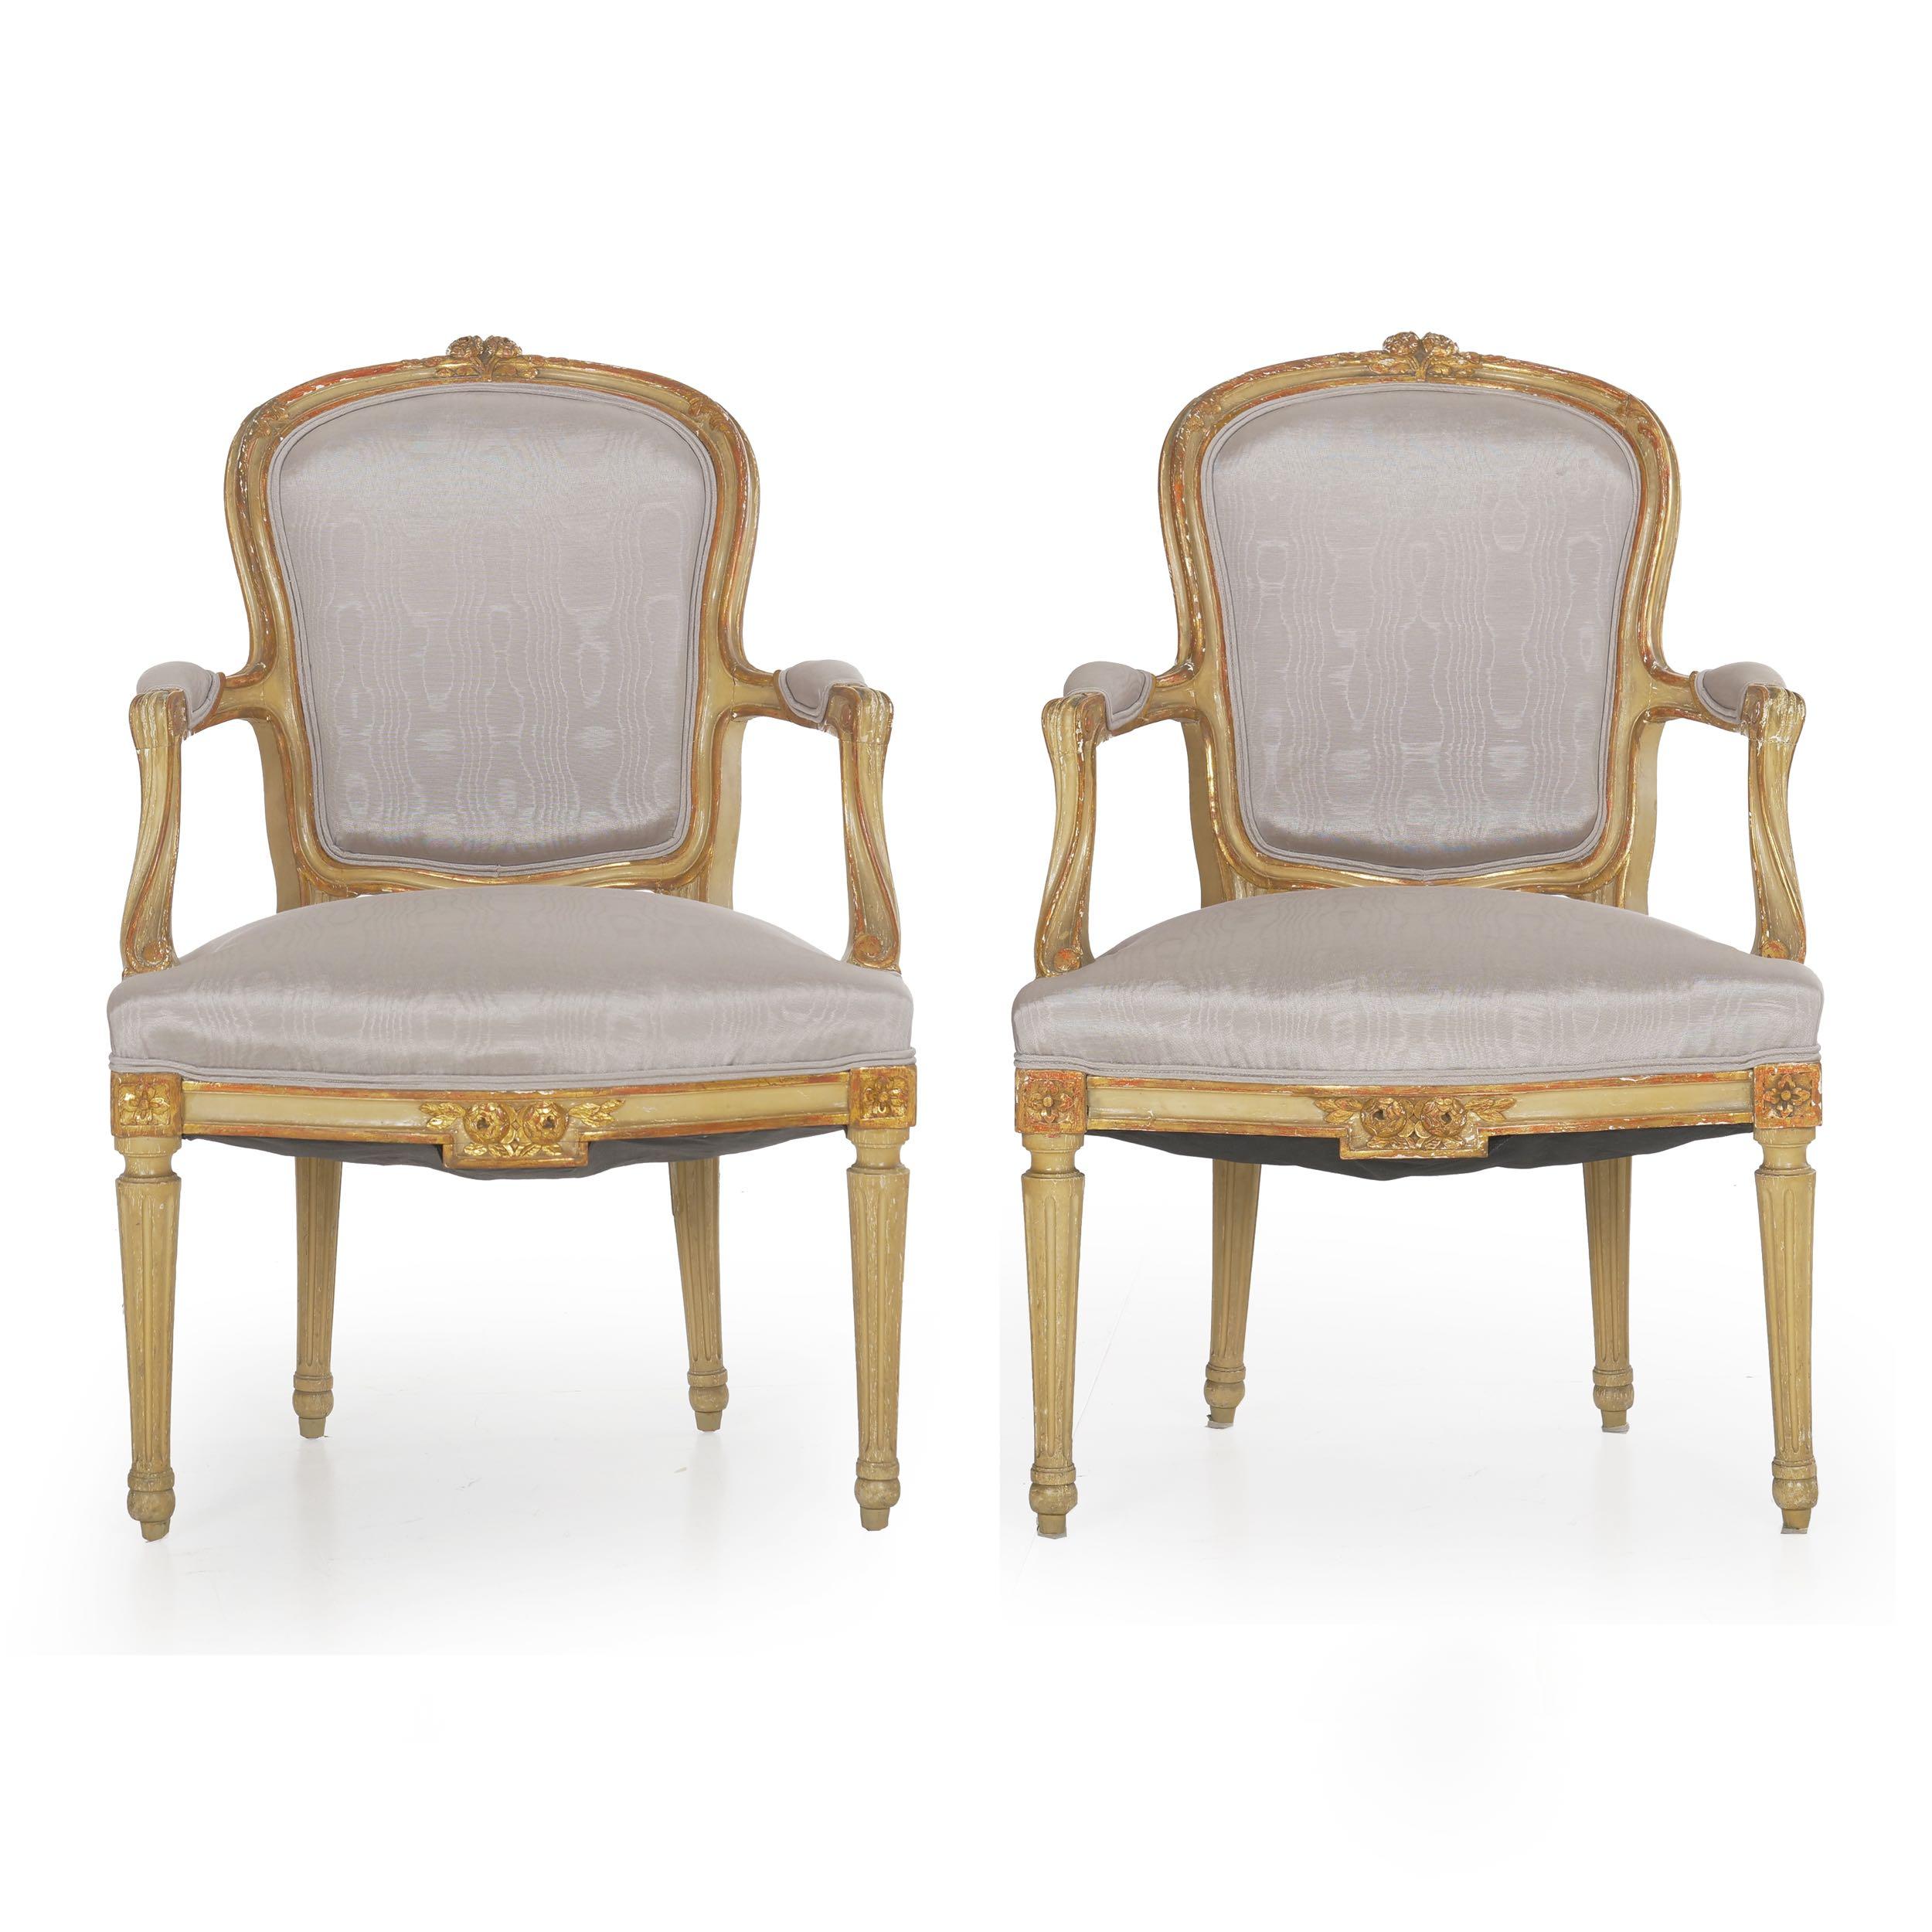 Pair of French neoclassical painted fauteuils
circa late 19th century
Item # 007EPT30 

A delightful pair of 19th century armchairs in the neoclassical taste of the Louis XVI period with an austere overall profile. The frames are lightly carved